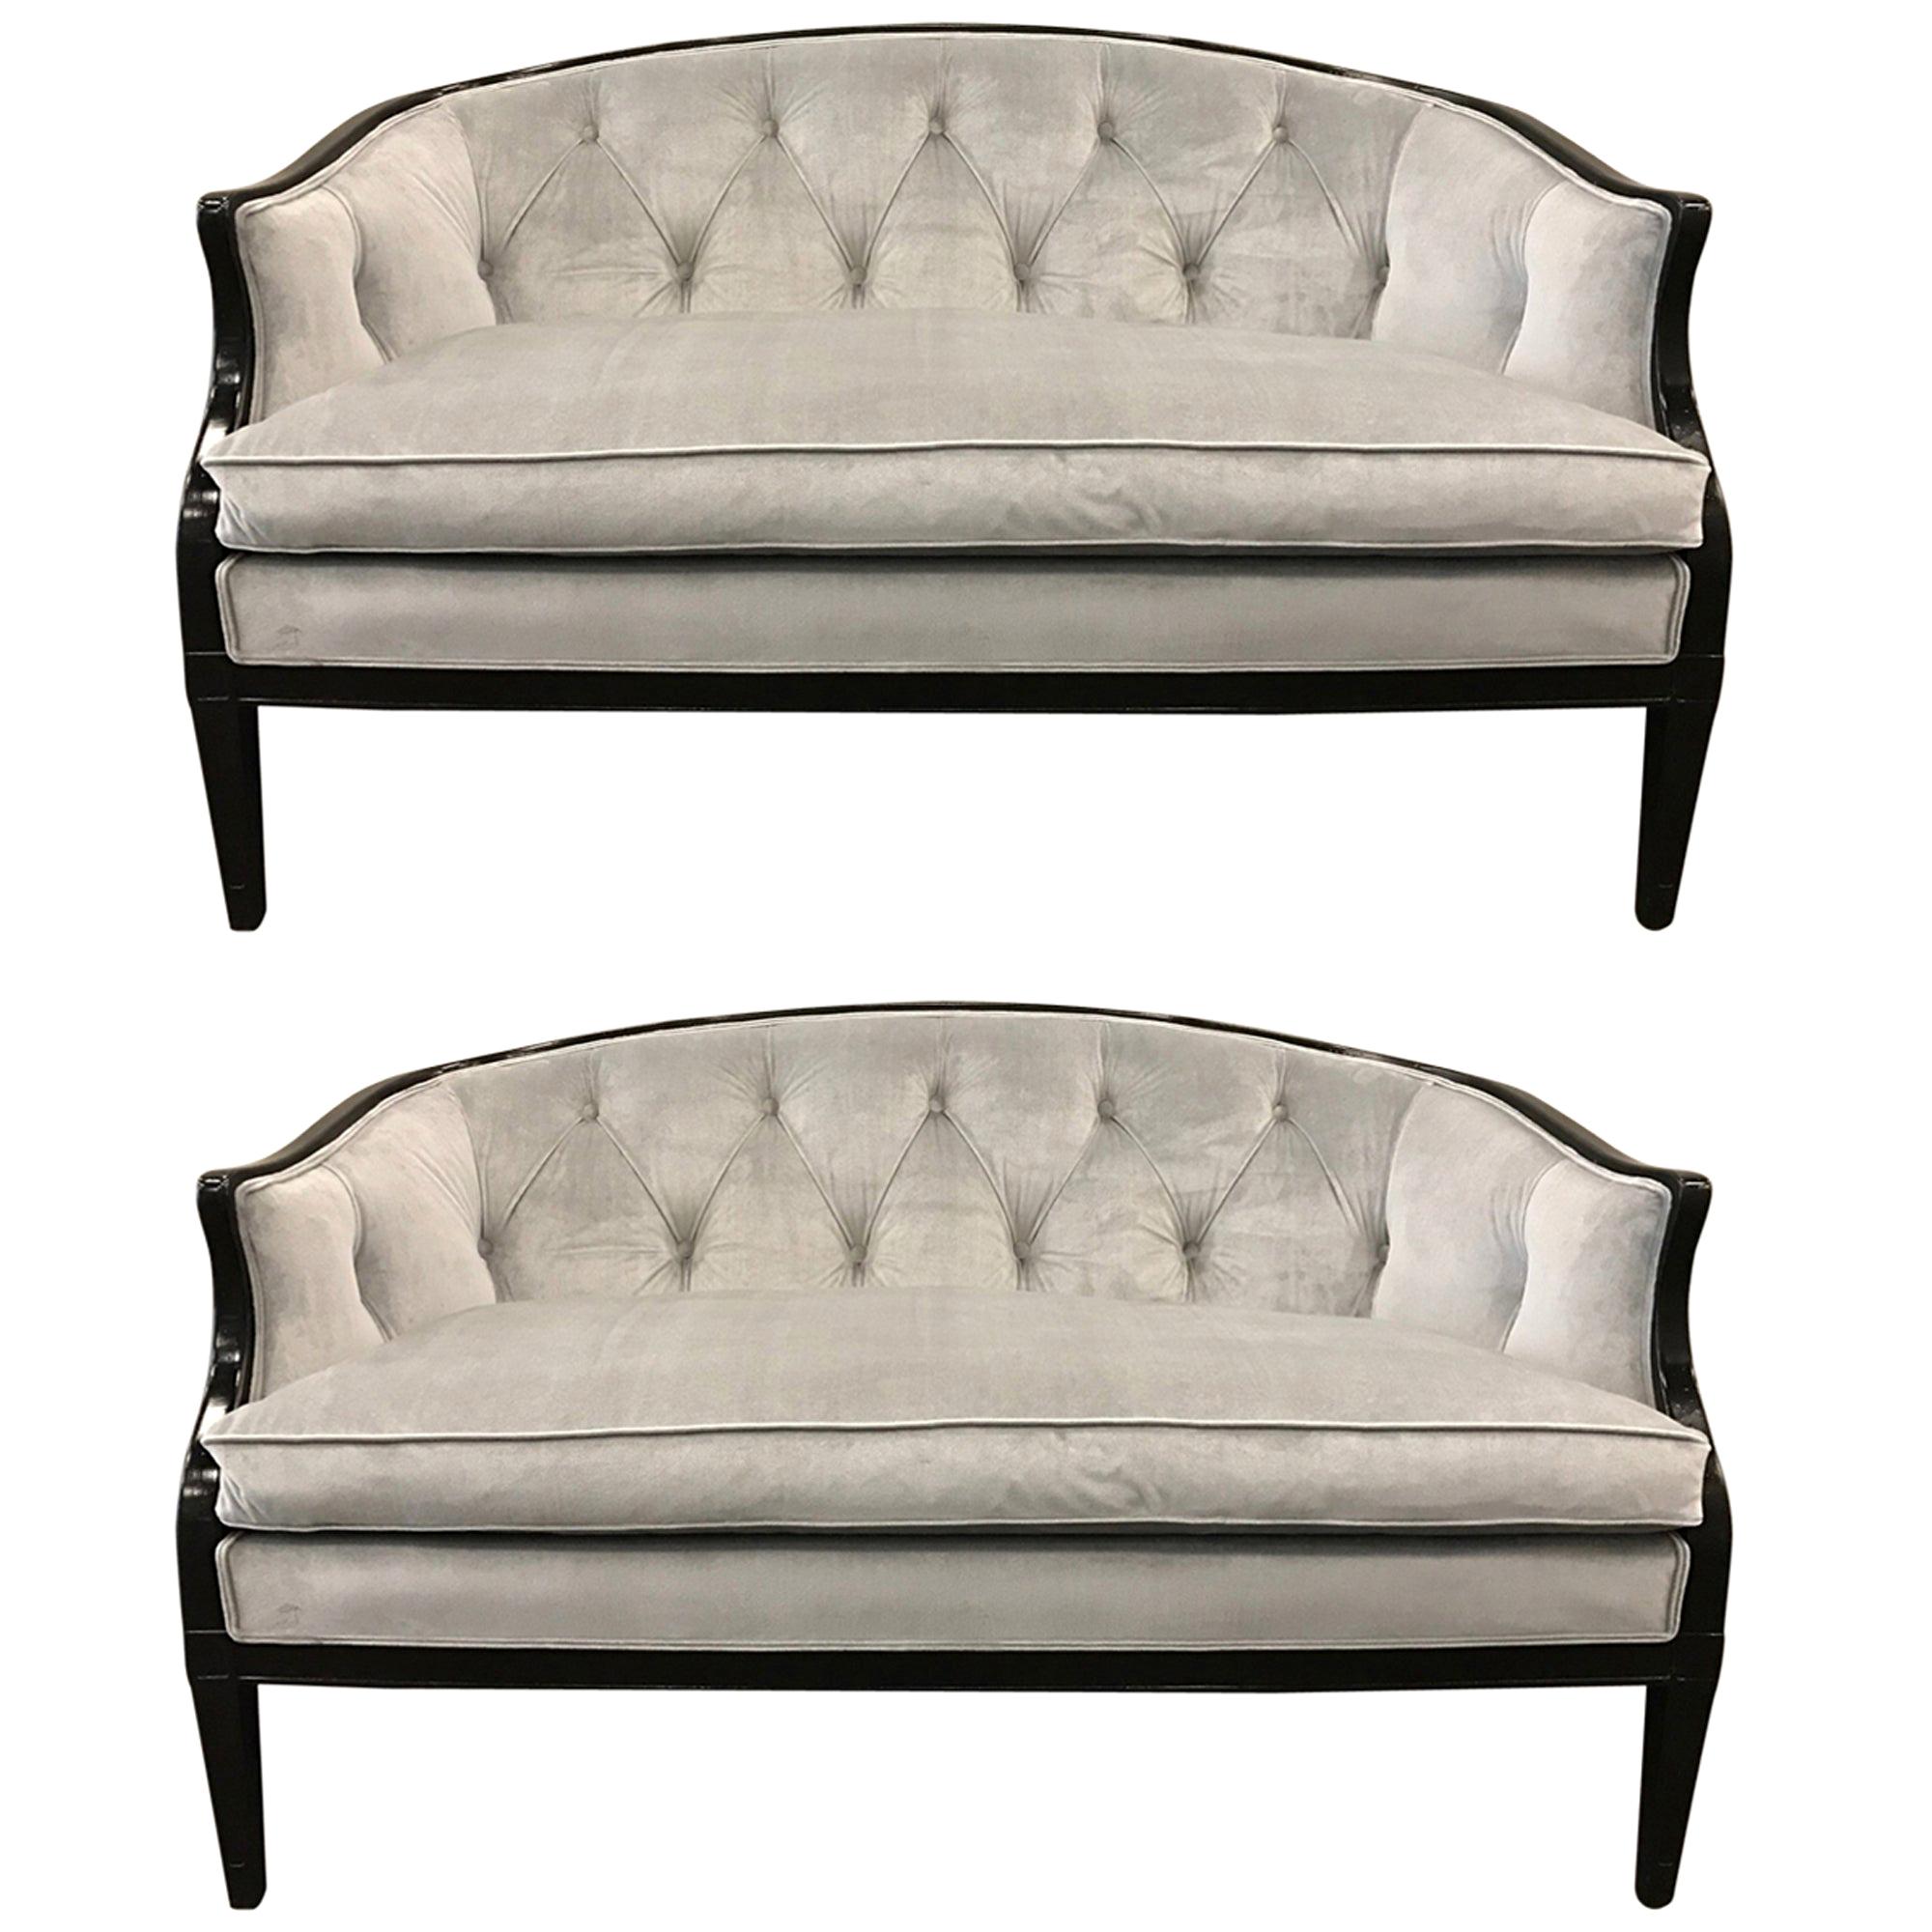 Pair of Regency Style Tufted Back Sofas